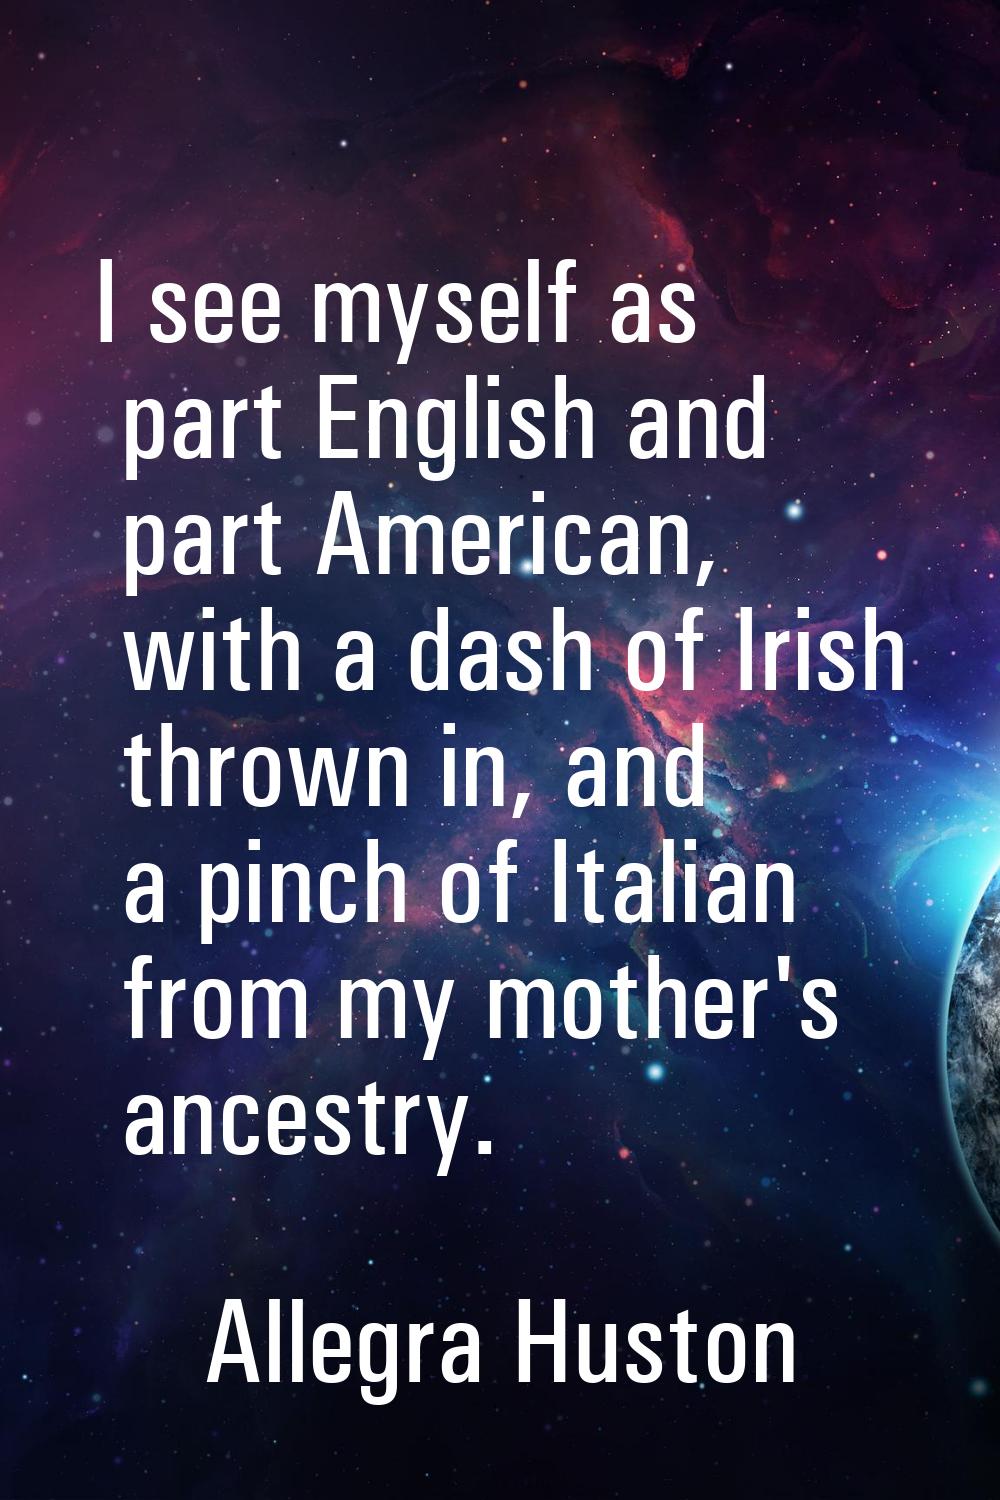 I see myself as part English and part American, with a dash of Irish thrown in, and a pinch of Ital